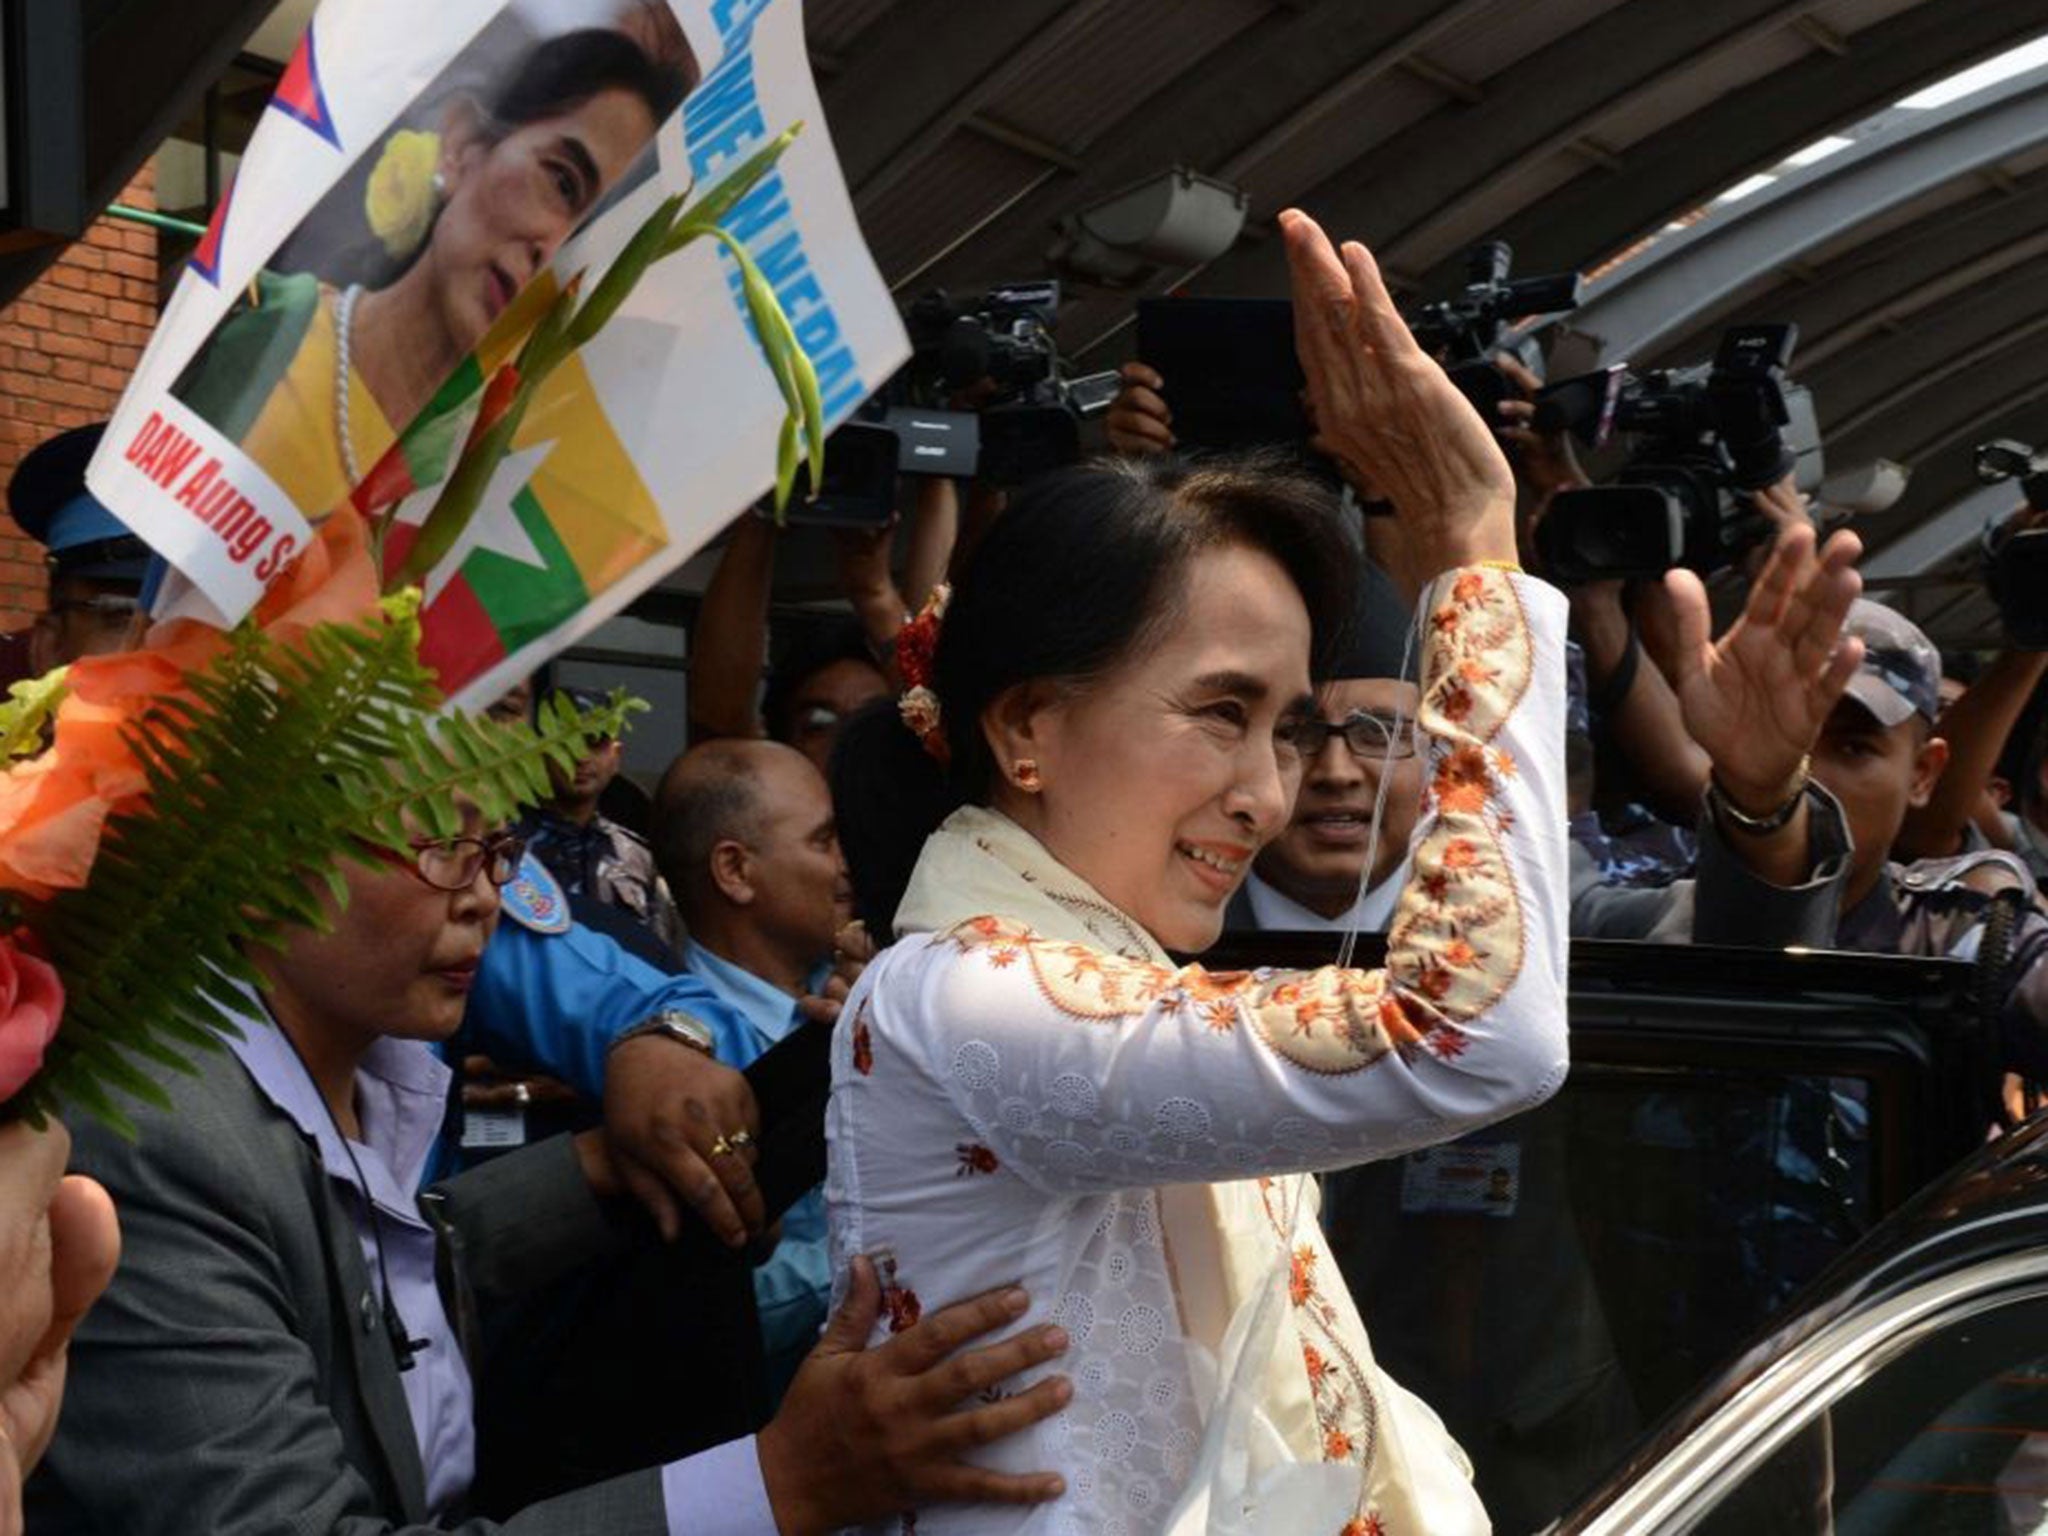 Aung San Suu Kyi gestures on her arrival at Tribhuvan International airport in Kathmandu on 13 June 13 2014 for a four-day official visit to Nepal